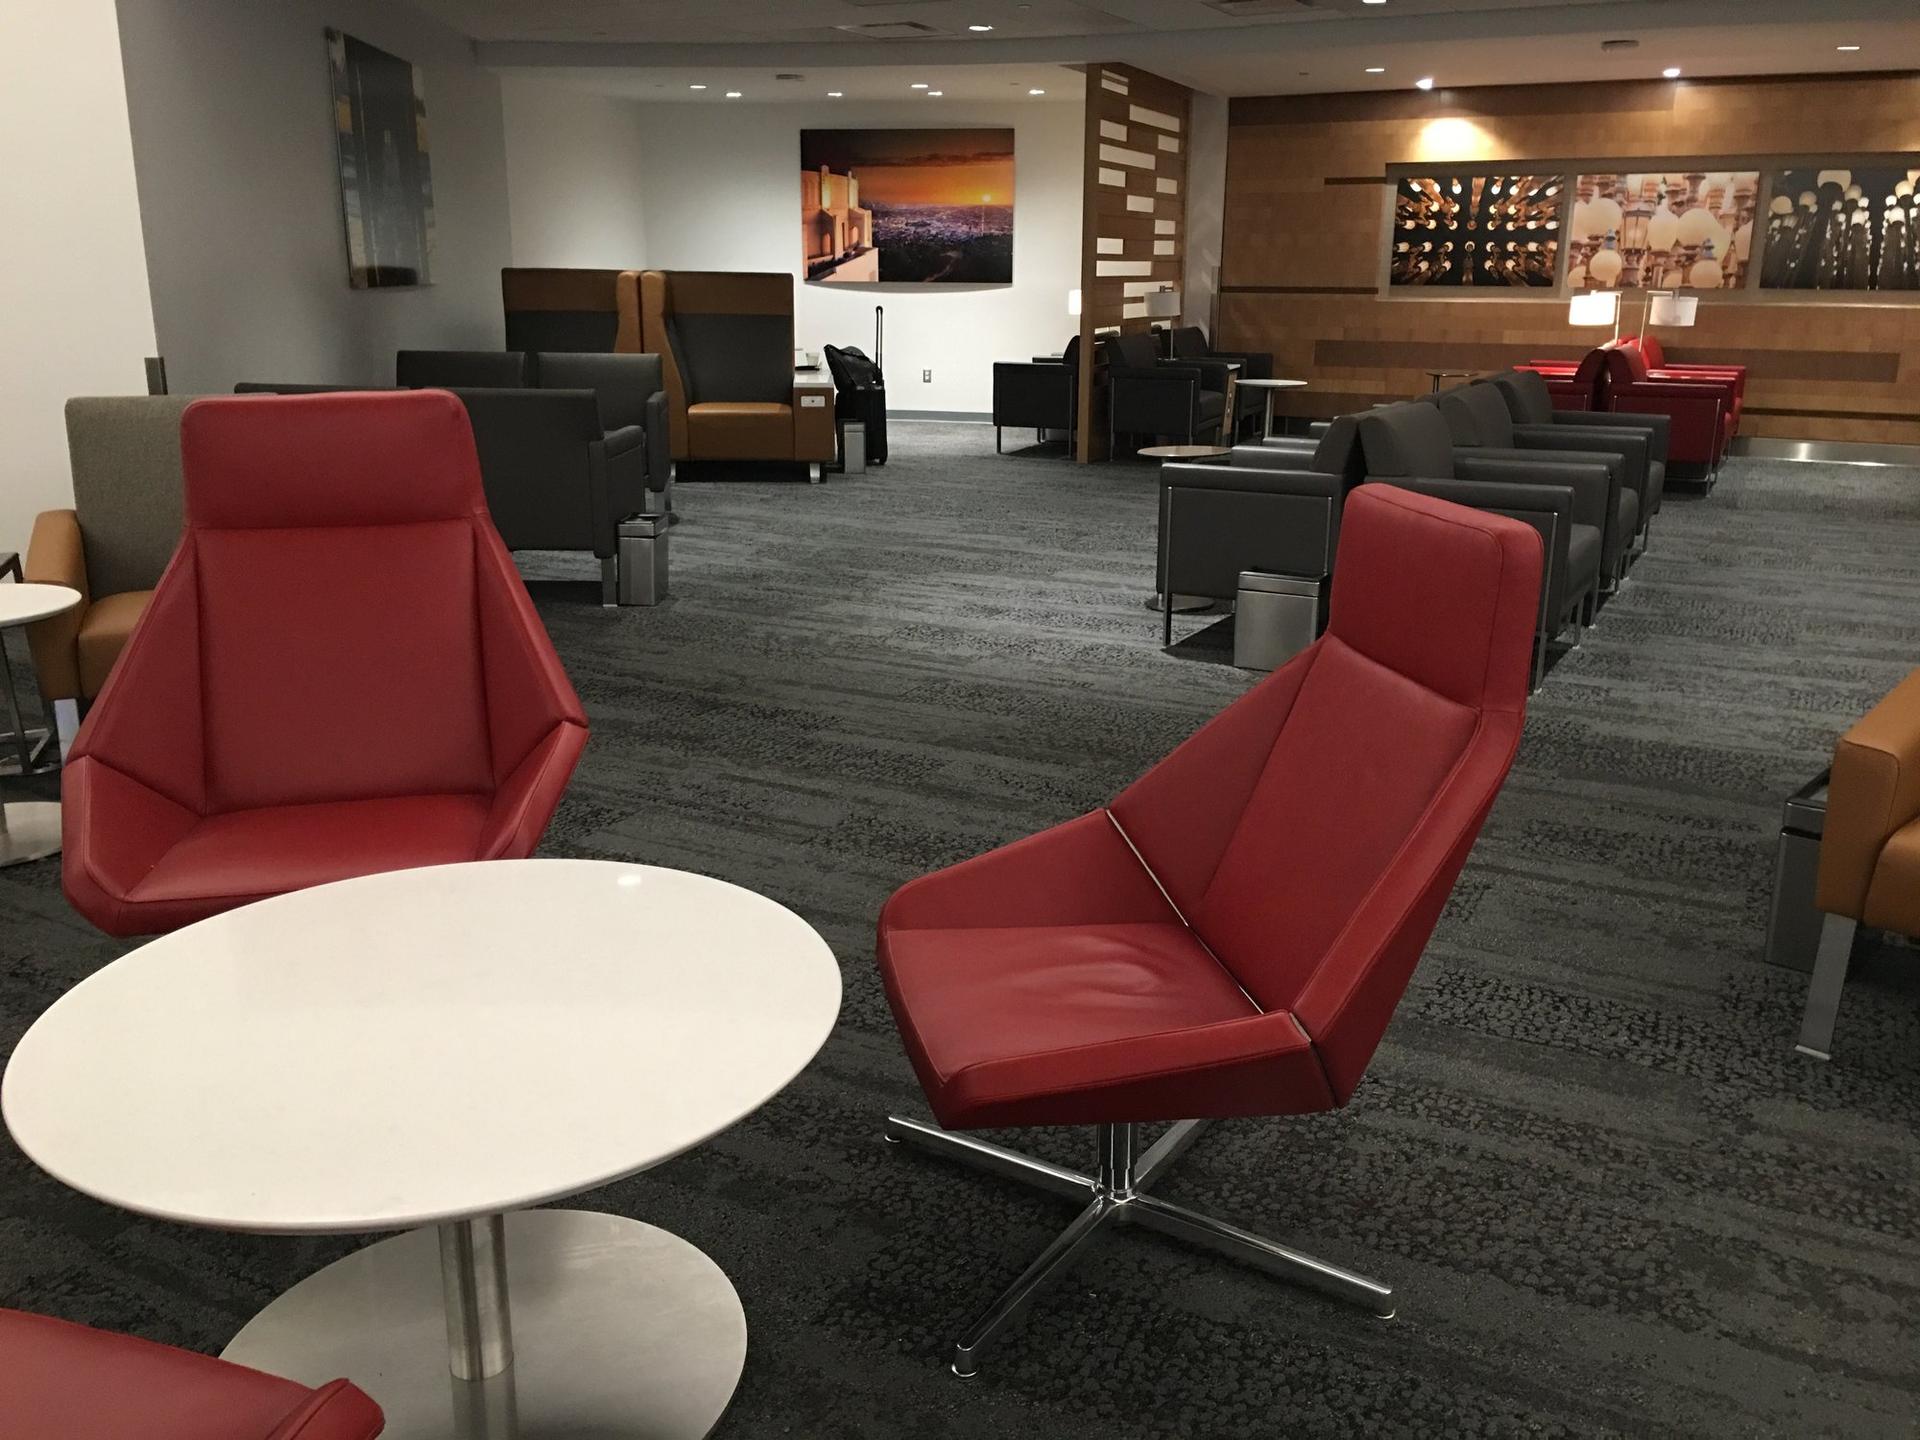 American Airlines Admirals Club image 6 of 38